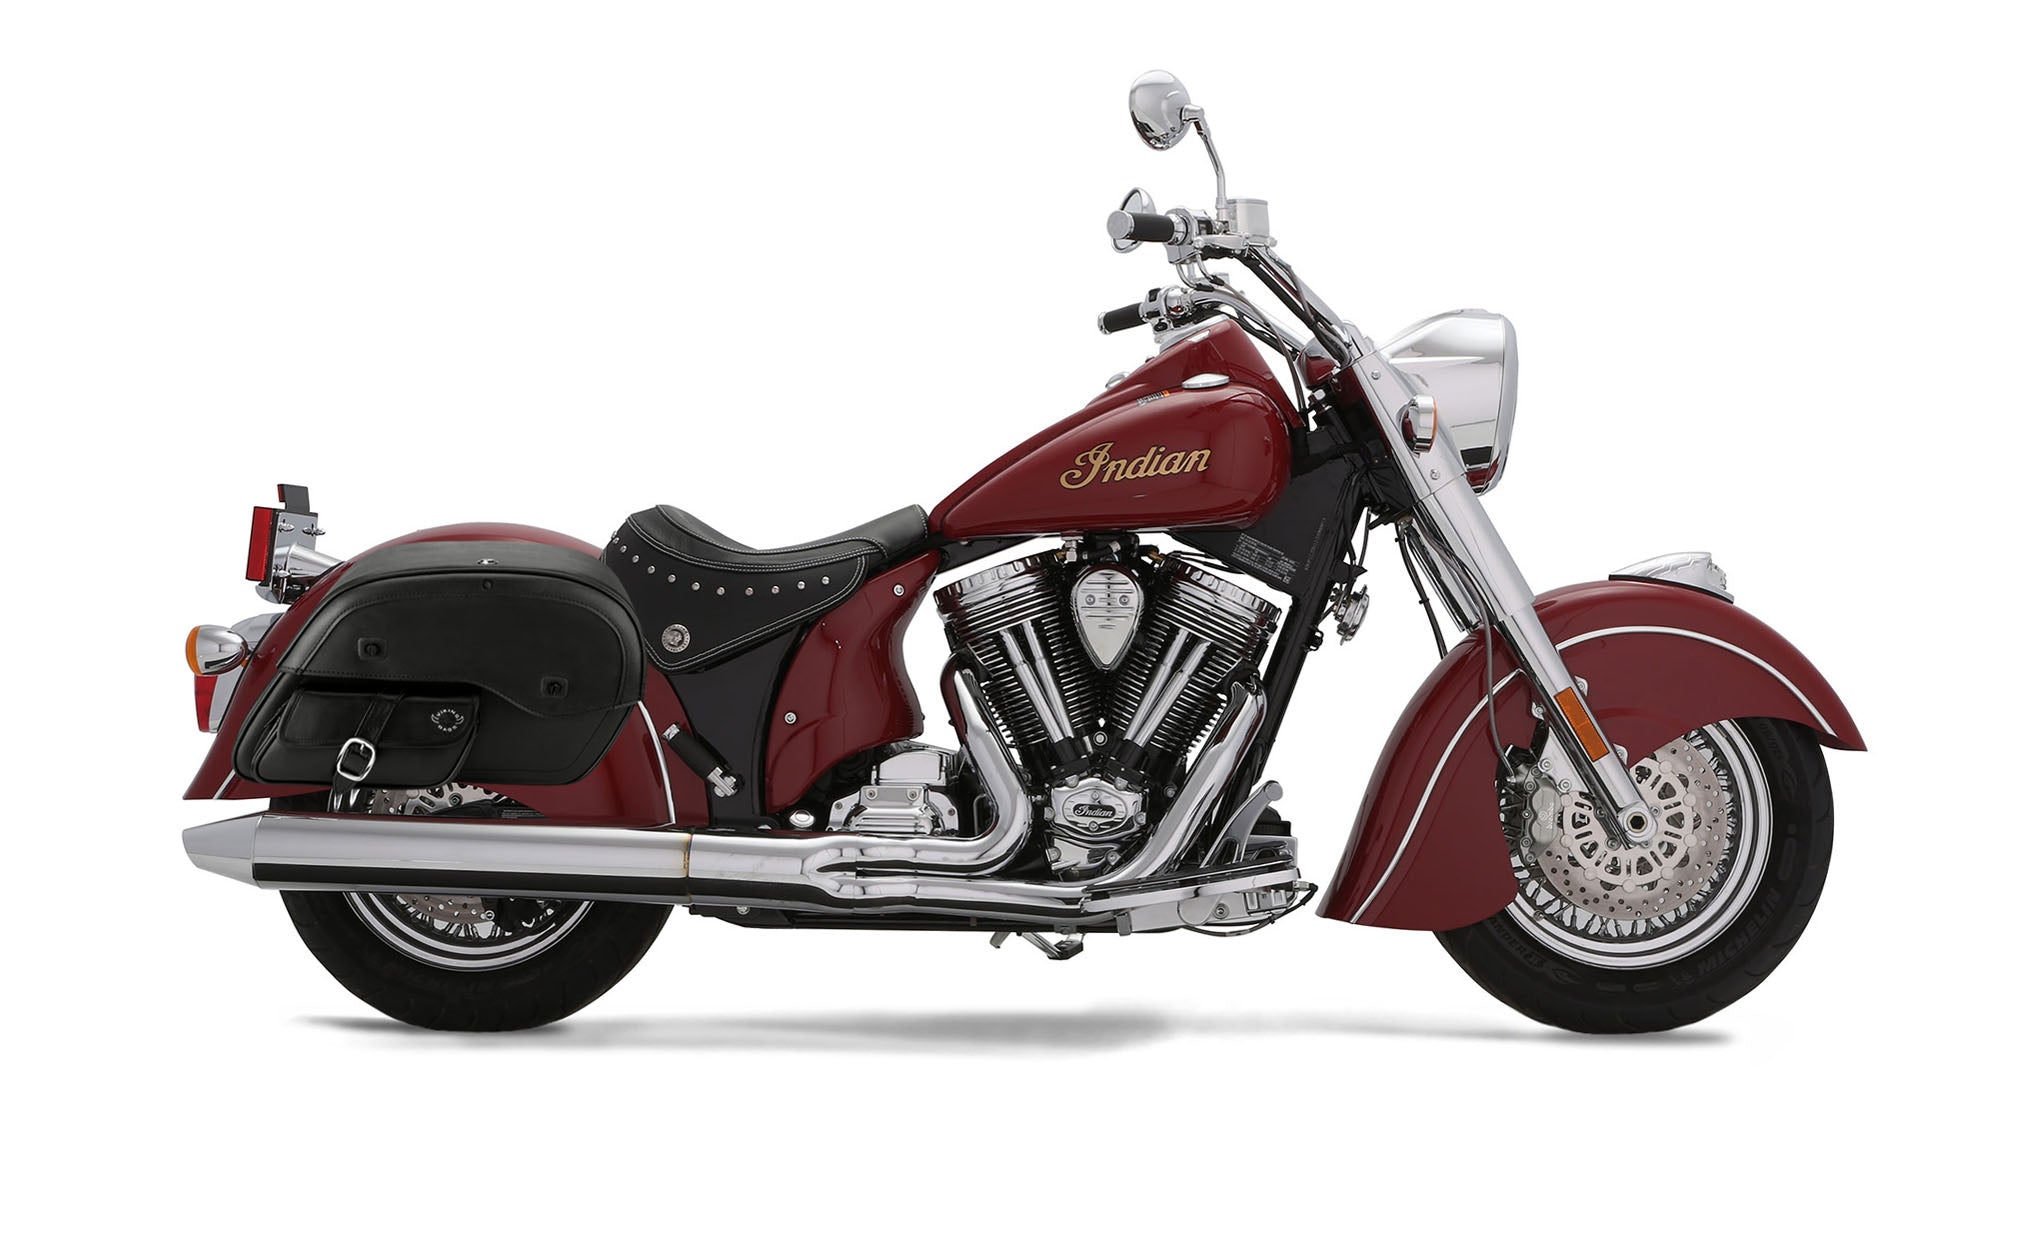 Viking Essential Side Pocket Large Indian Chief Deluxe Leather Motorcycle Saddlebags on Bike Photo @expand